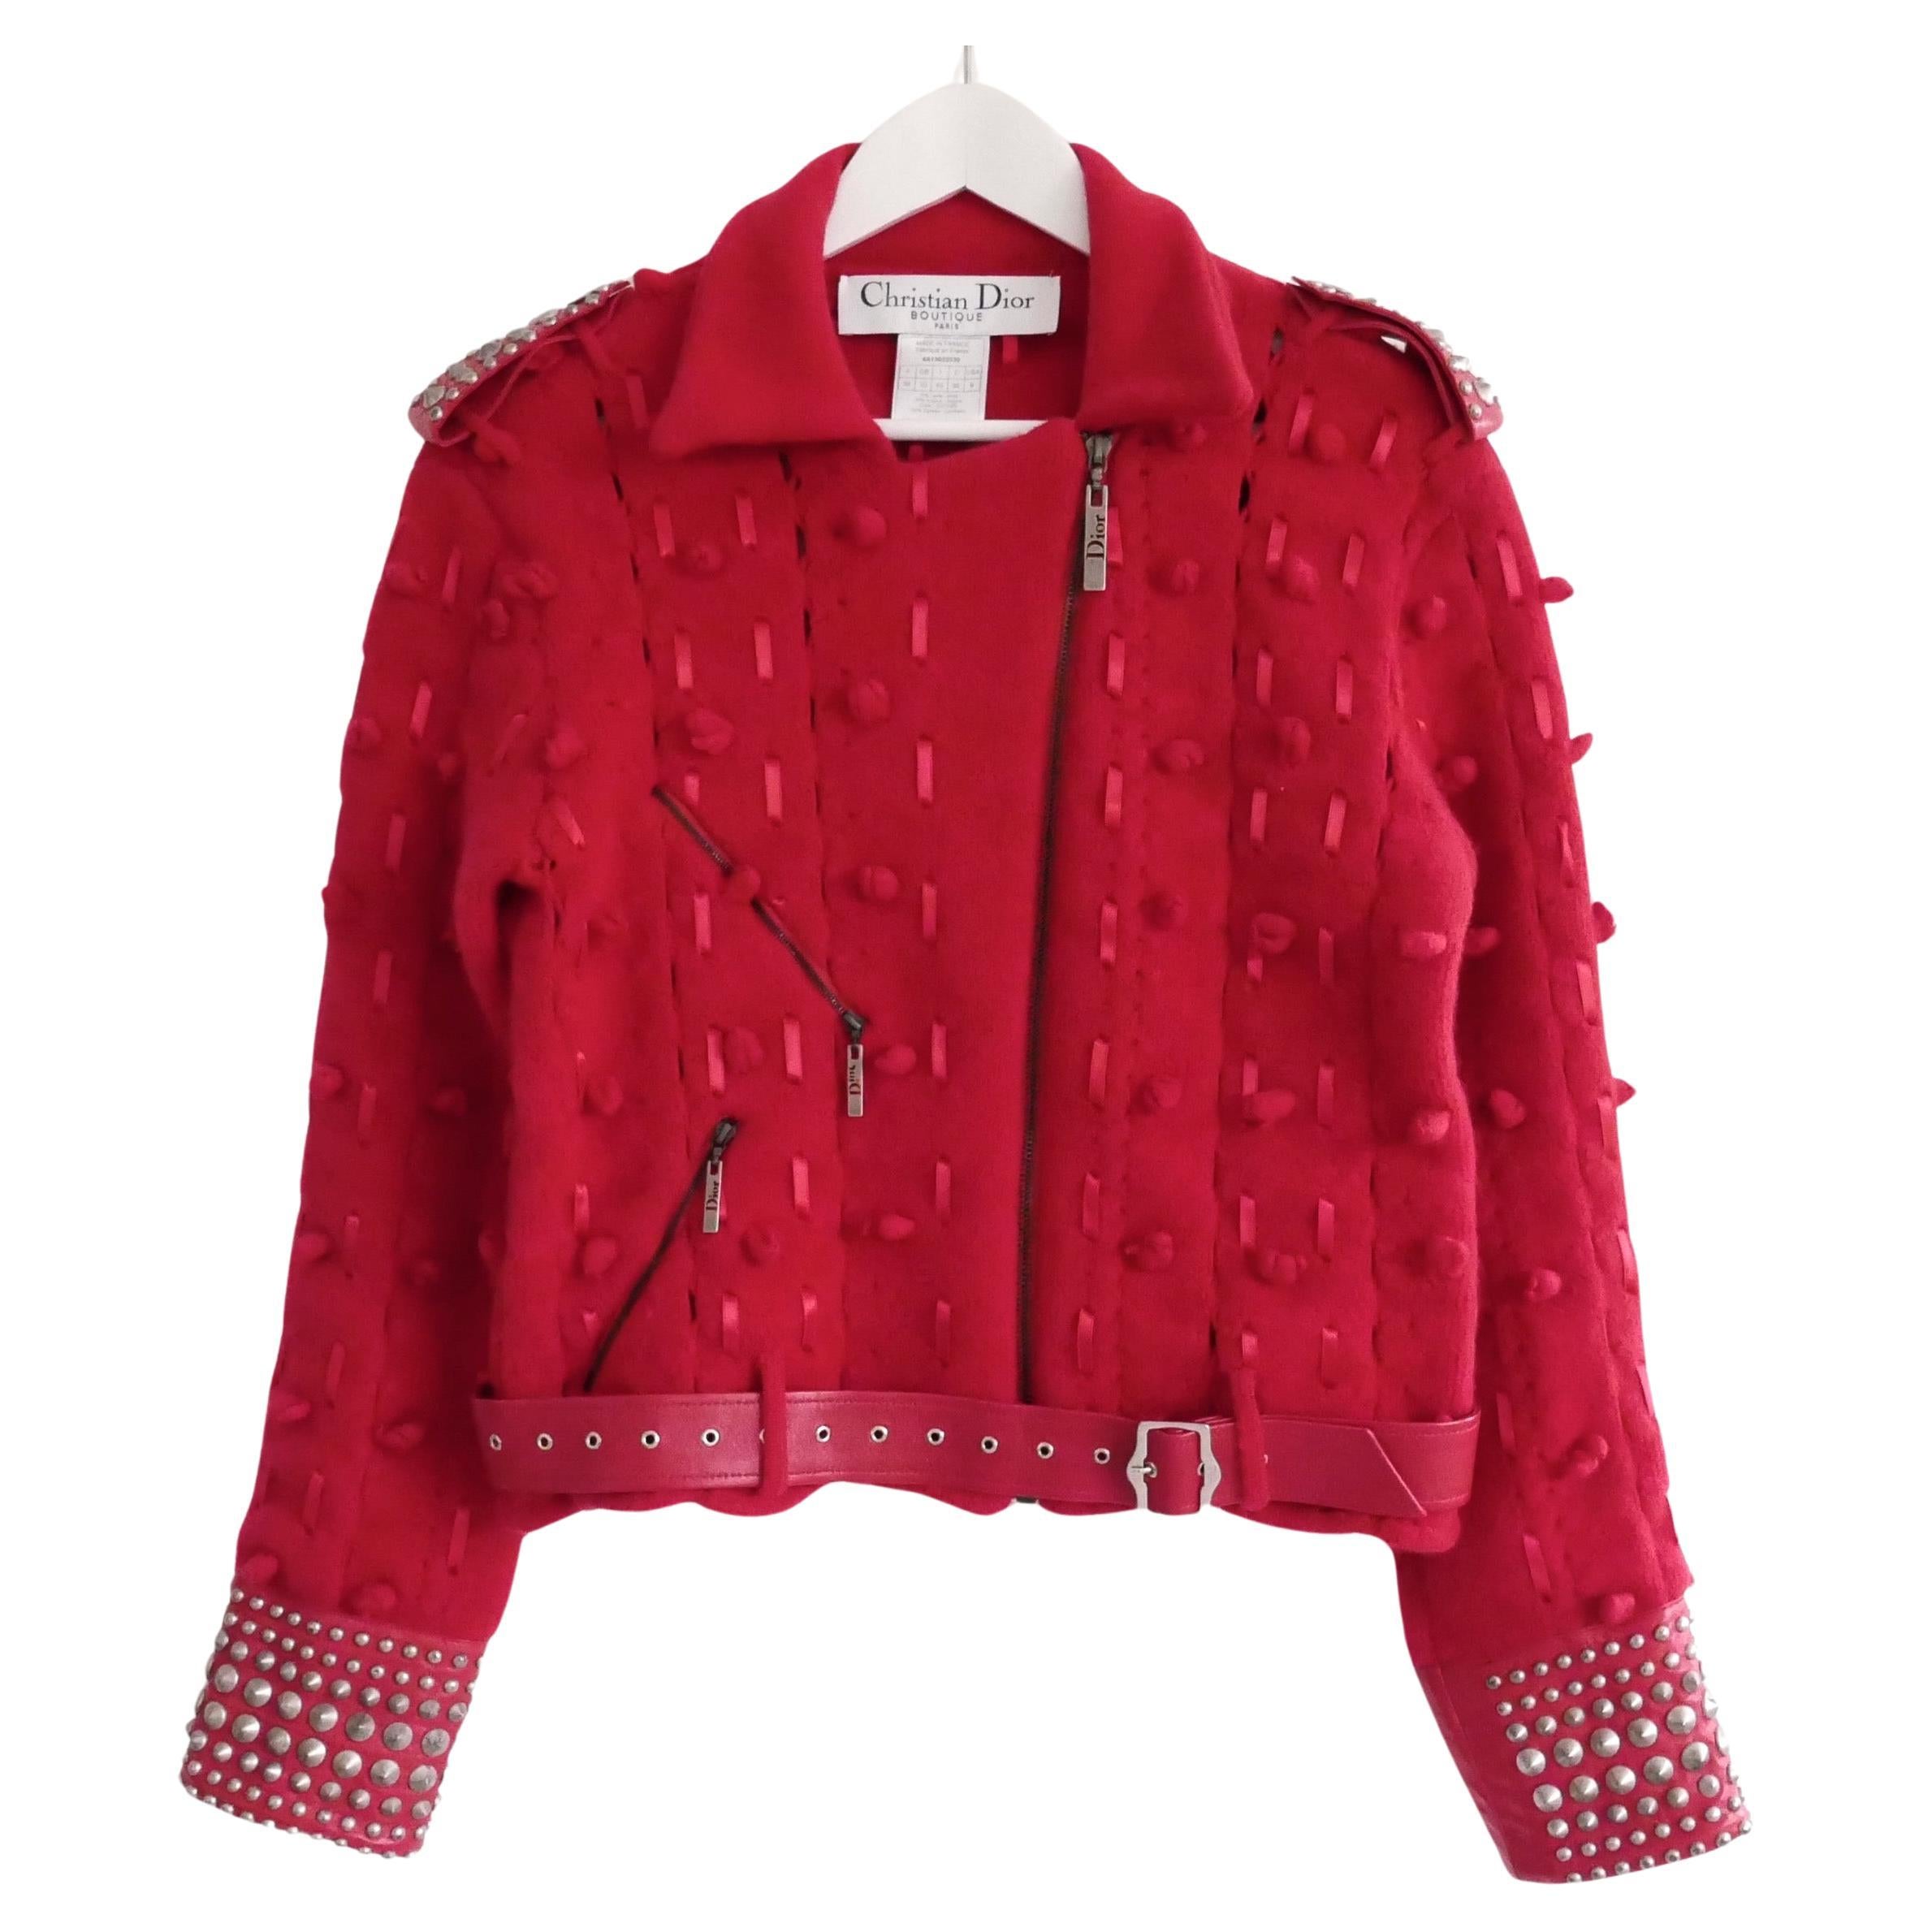 Christian Dior x Galliano AW04 Red Wool & Studded Leather Biker Jacket For Sale